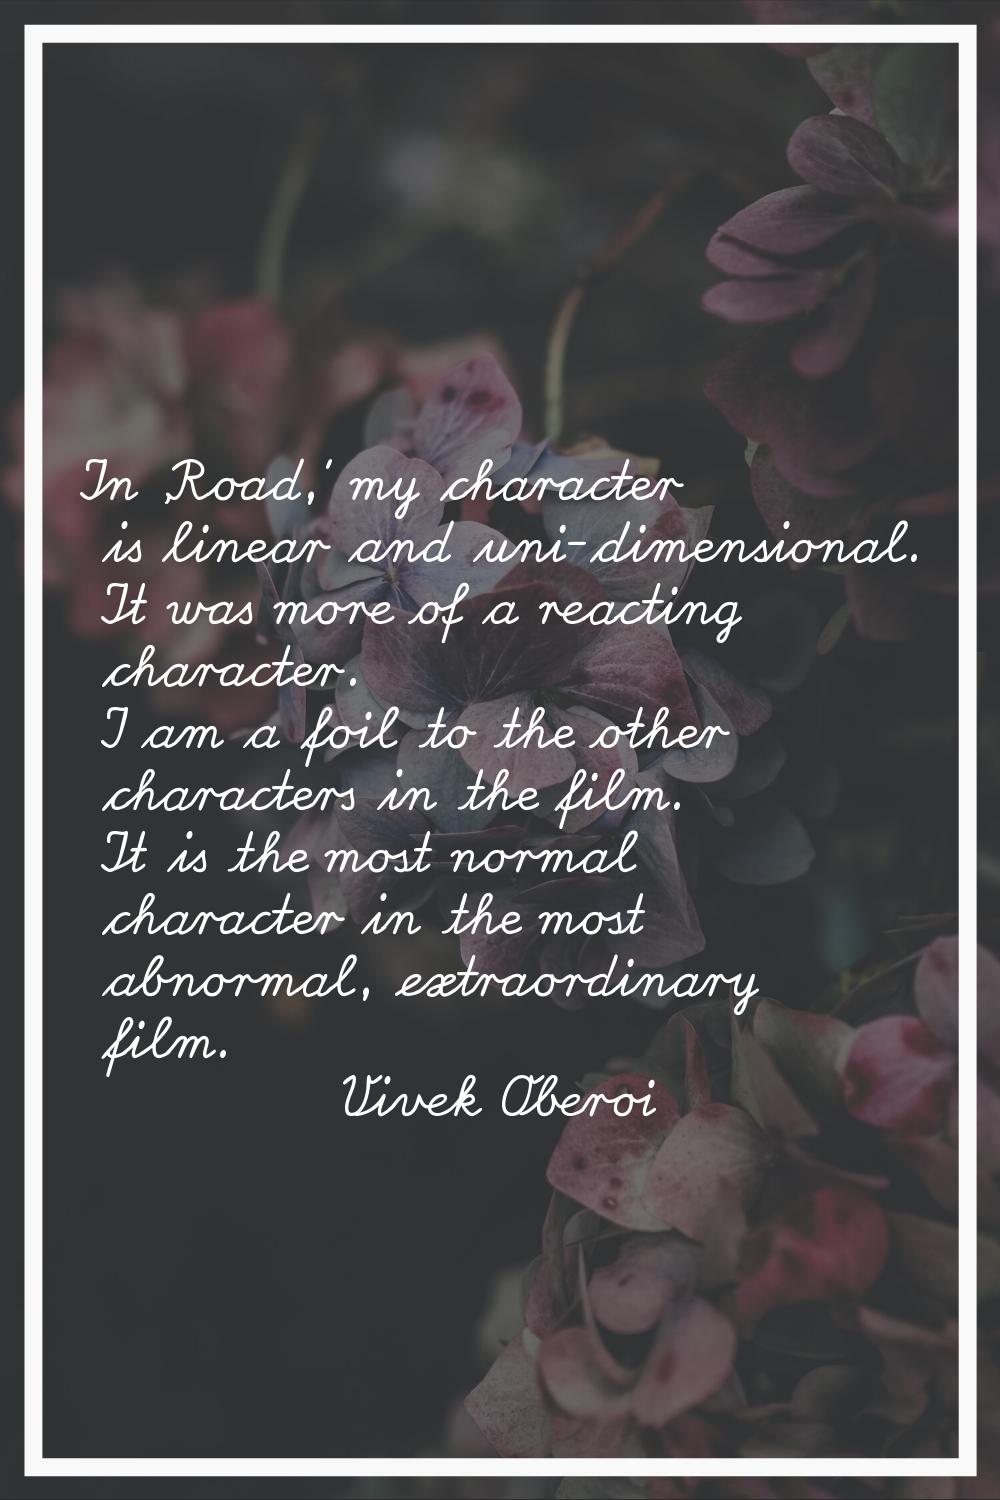 In 'Road,' my character is linear and uni-dimensional. It was more of a reacting character. I am a 